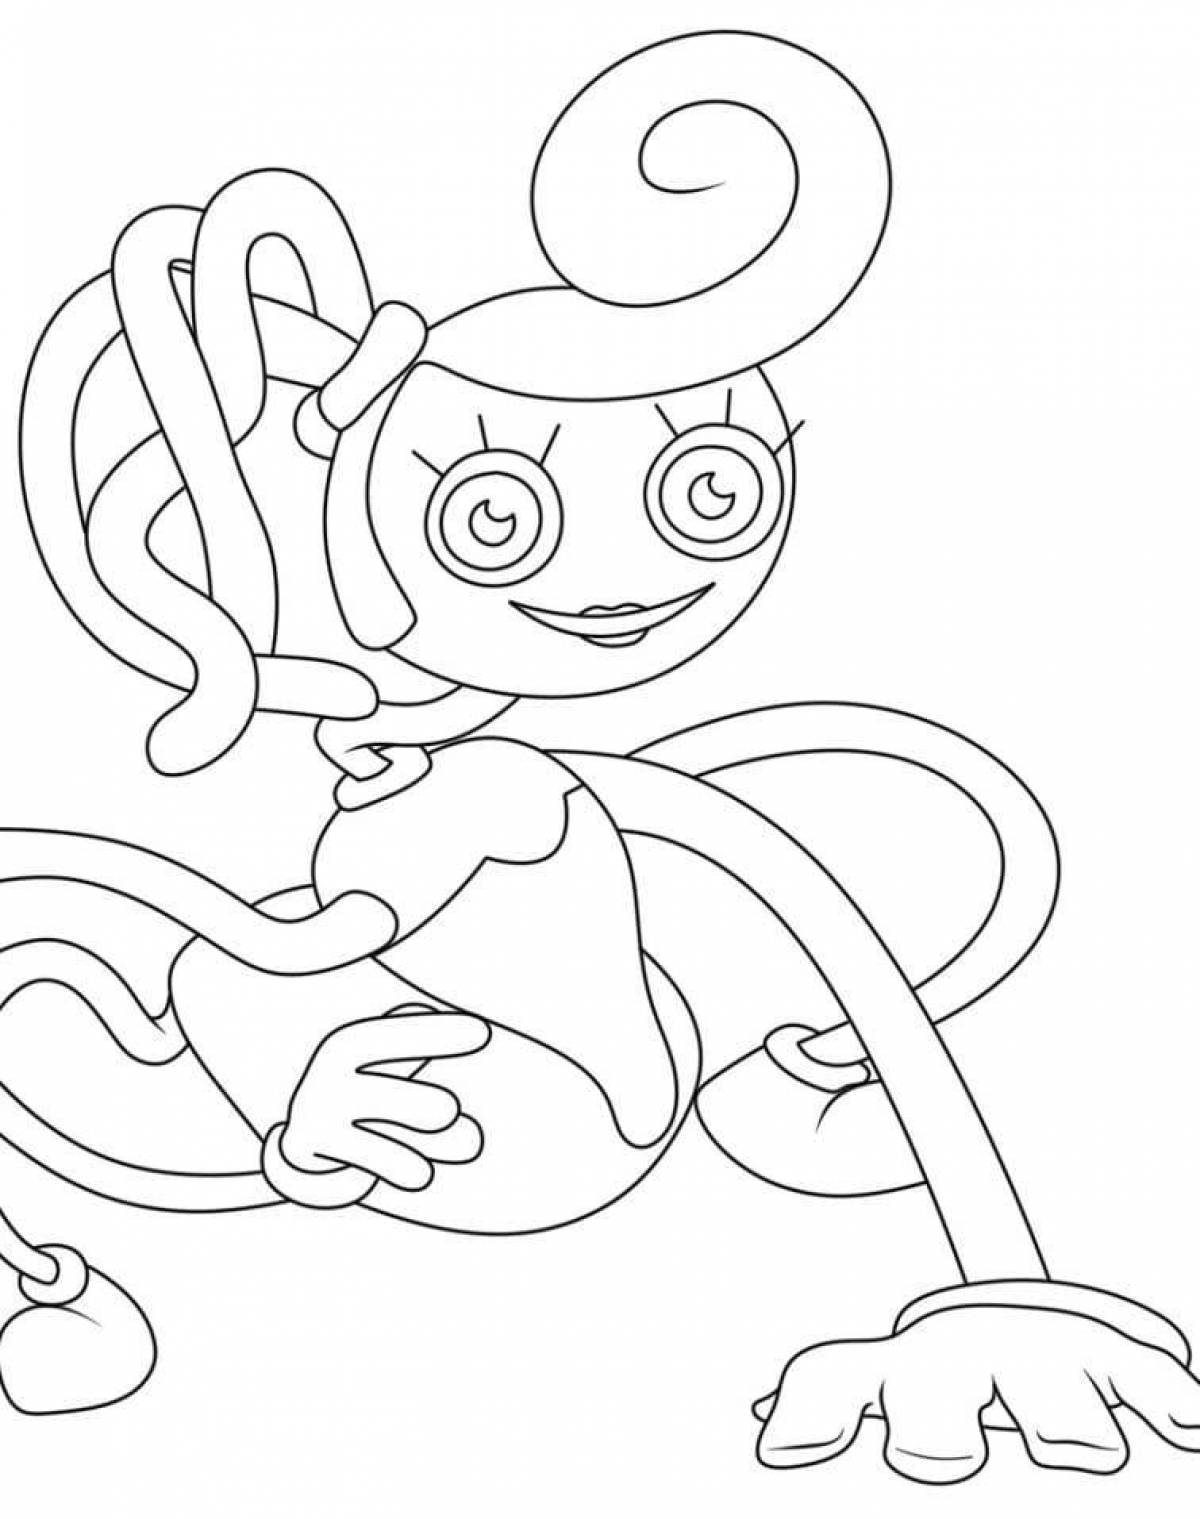 Coloring book playful mommy with long legs